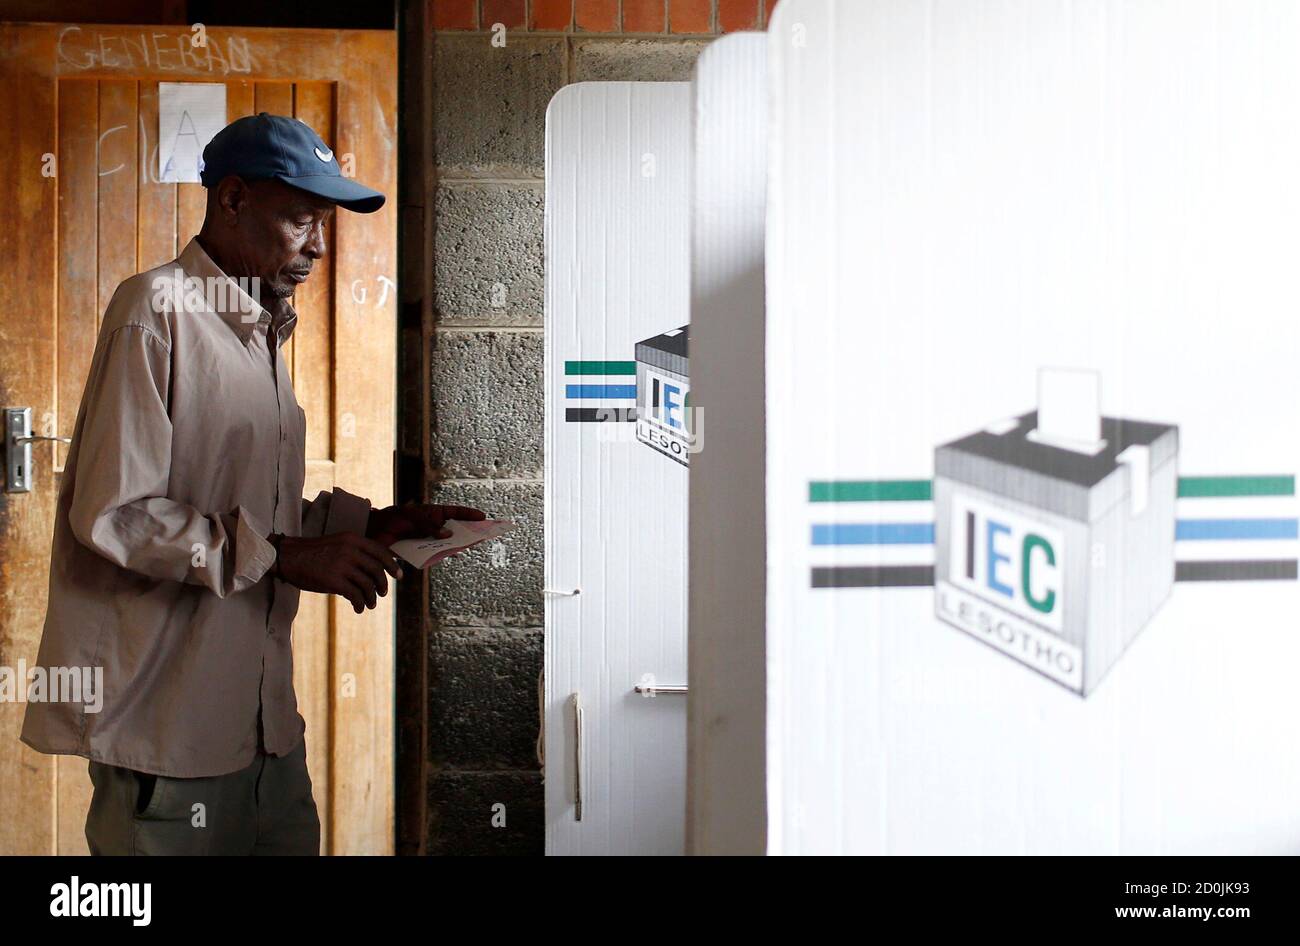 A man arrives to cast his vote during Lesotho's national election in Qoaling village, outside the capital Maseru, February 28, 2015. The people of Lesotho voted on Saturday in a tense election they hope will restore stability six months after an attempted coup in the southern African nation.The vote is being held around two years ahead of schedule under a political deal brokered by South African deputy president Cyril Ramaphosa. REUTERS/Siphiwe Sibeko (LESOTHO - Tags: POLITICS ELECTIONS) Stock Photo